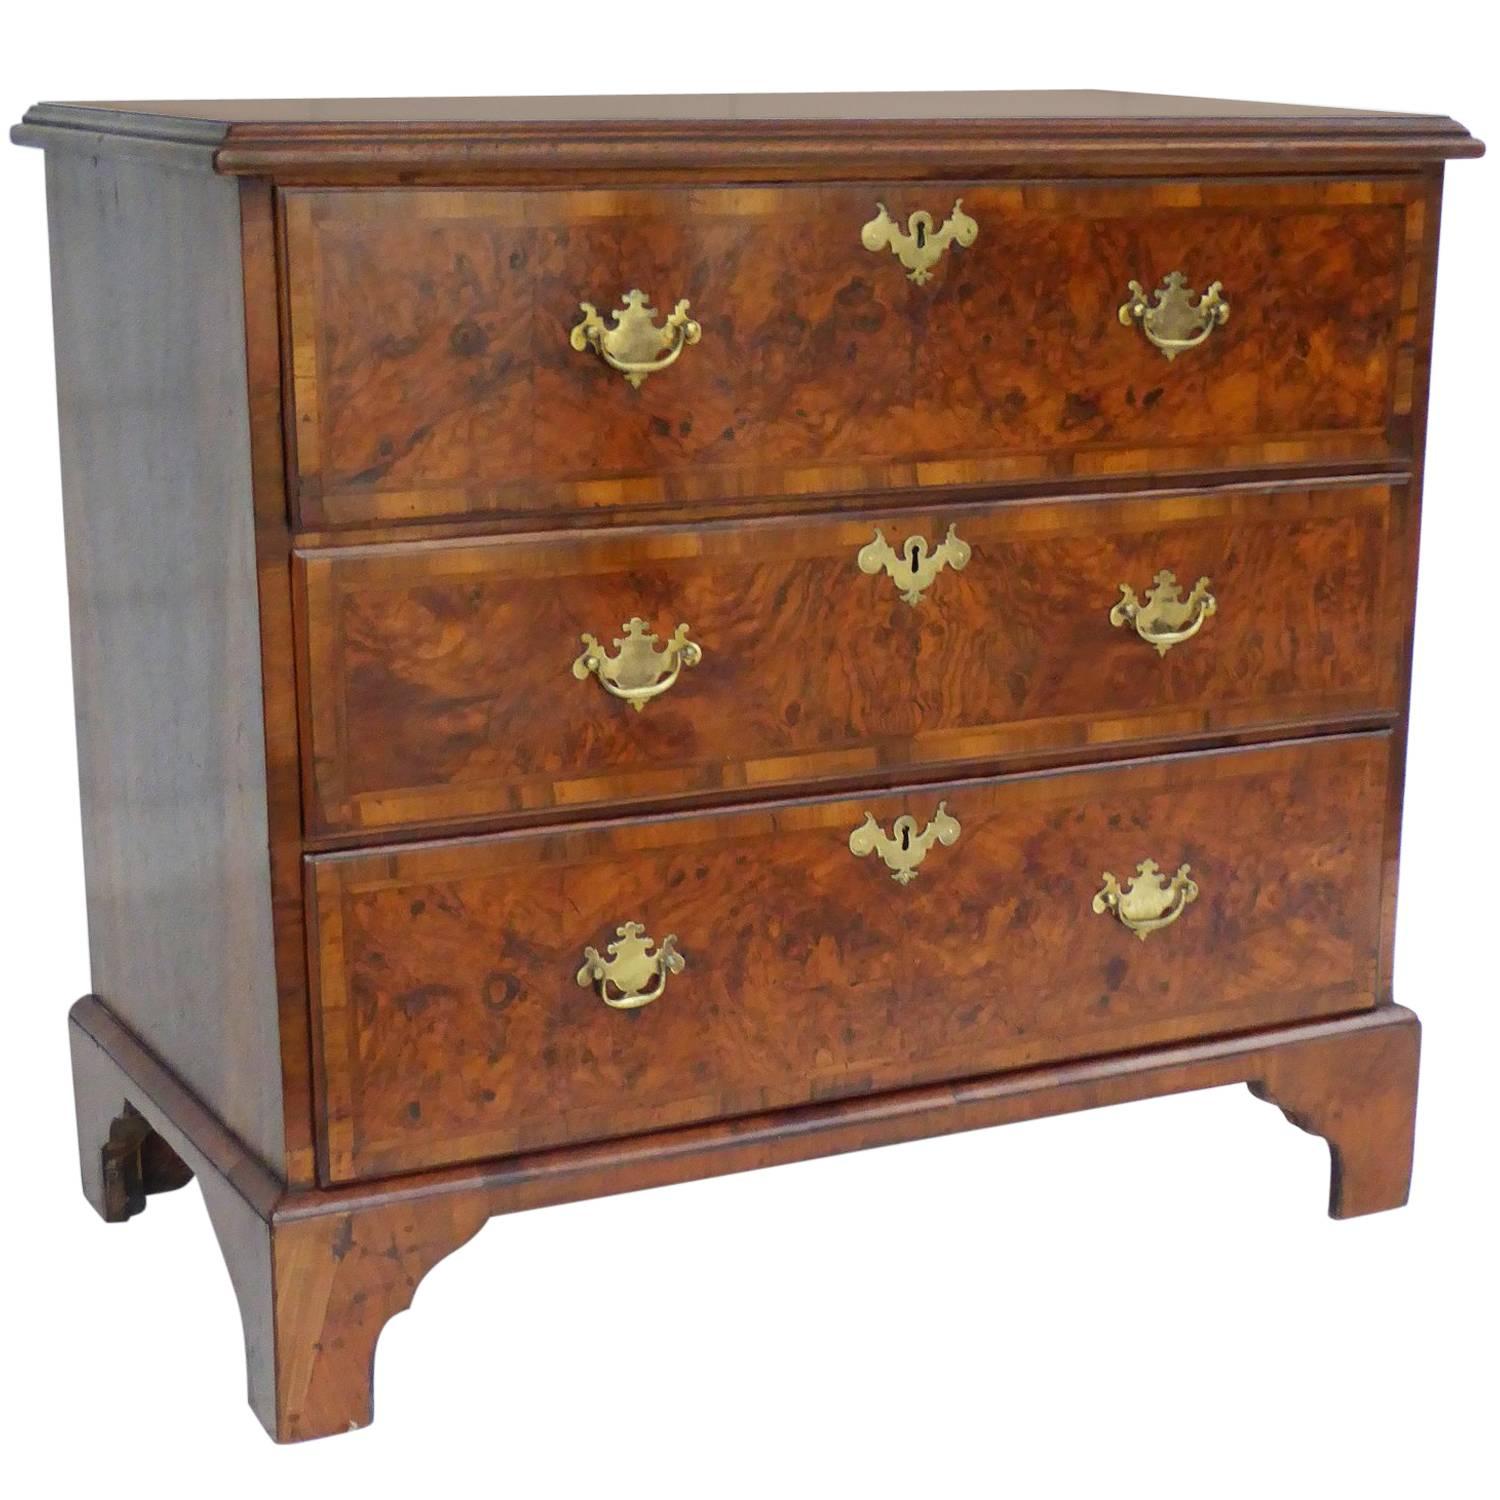 19th Century Early George III Burr Walnut Secretaire Chest of Drawers